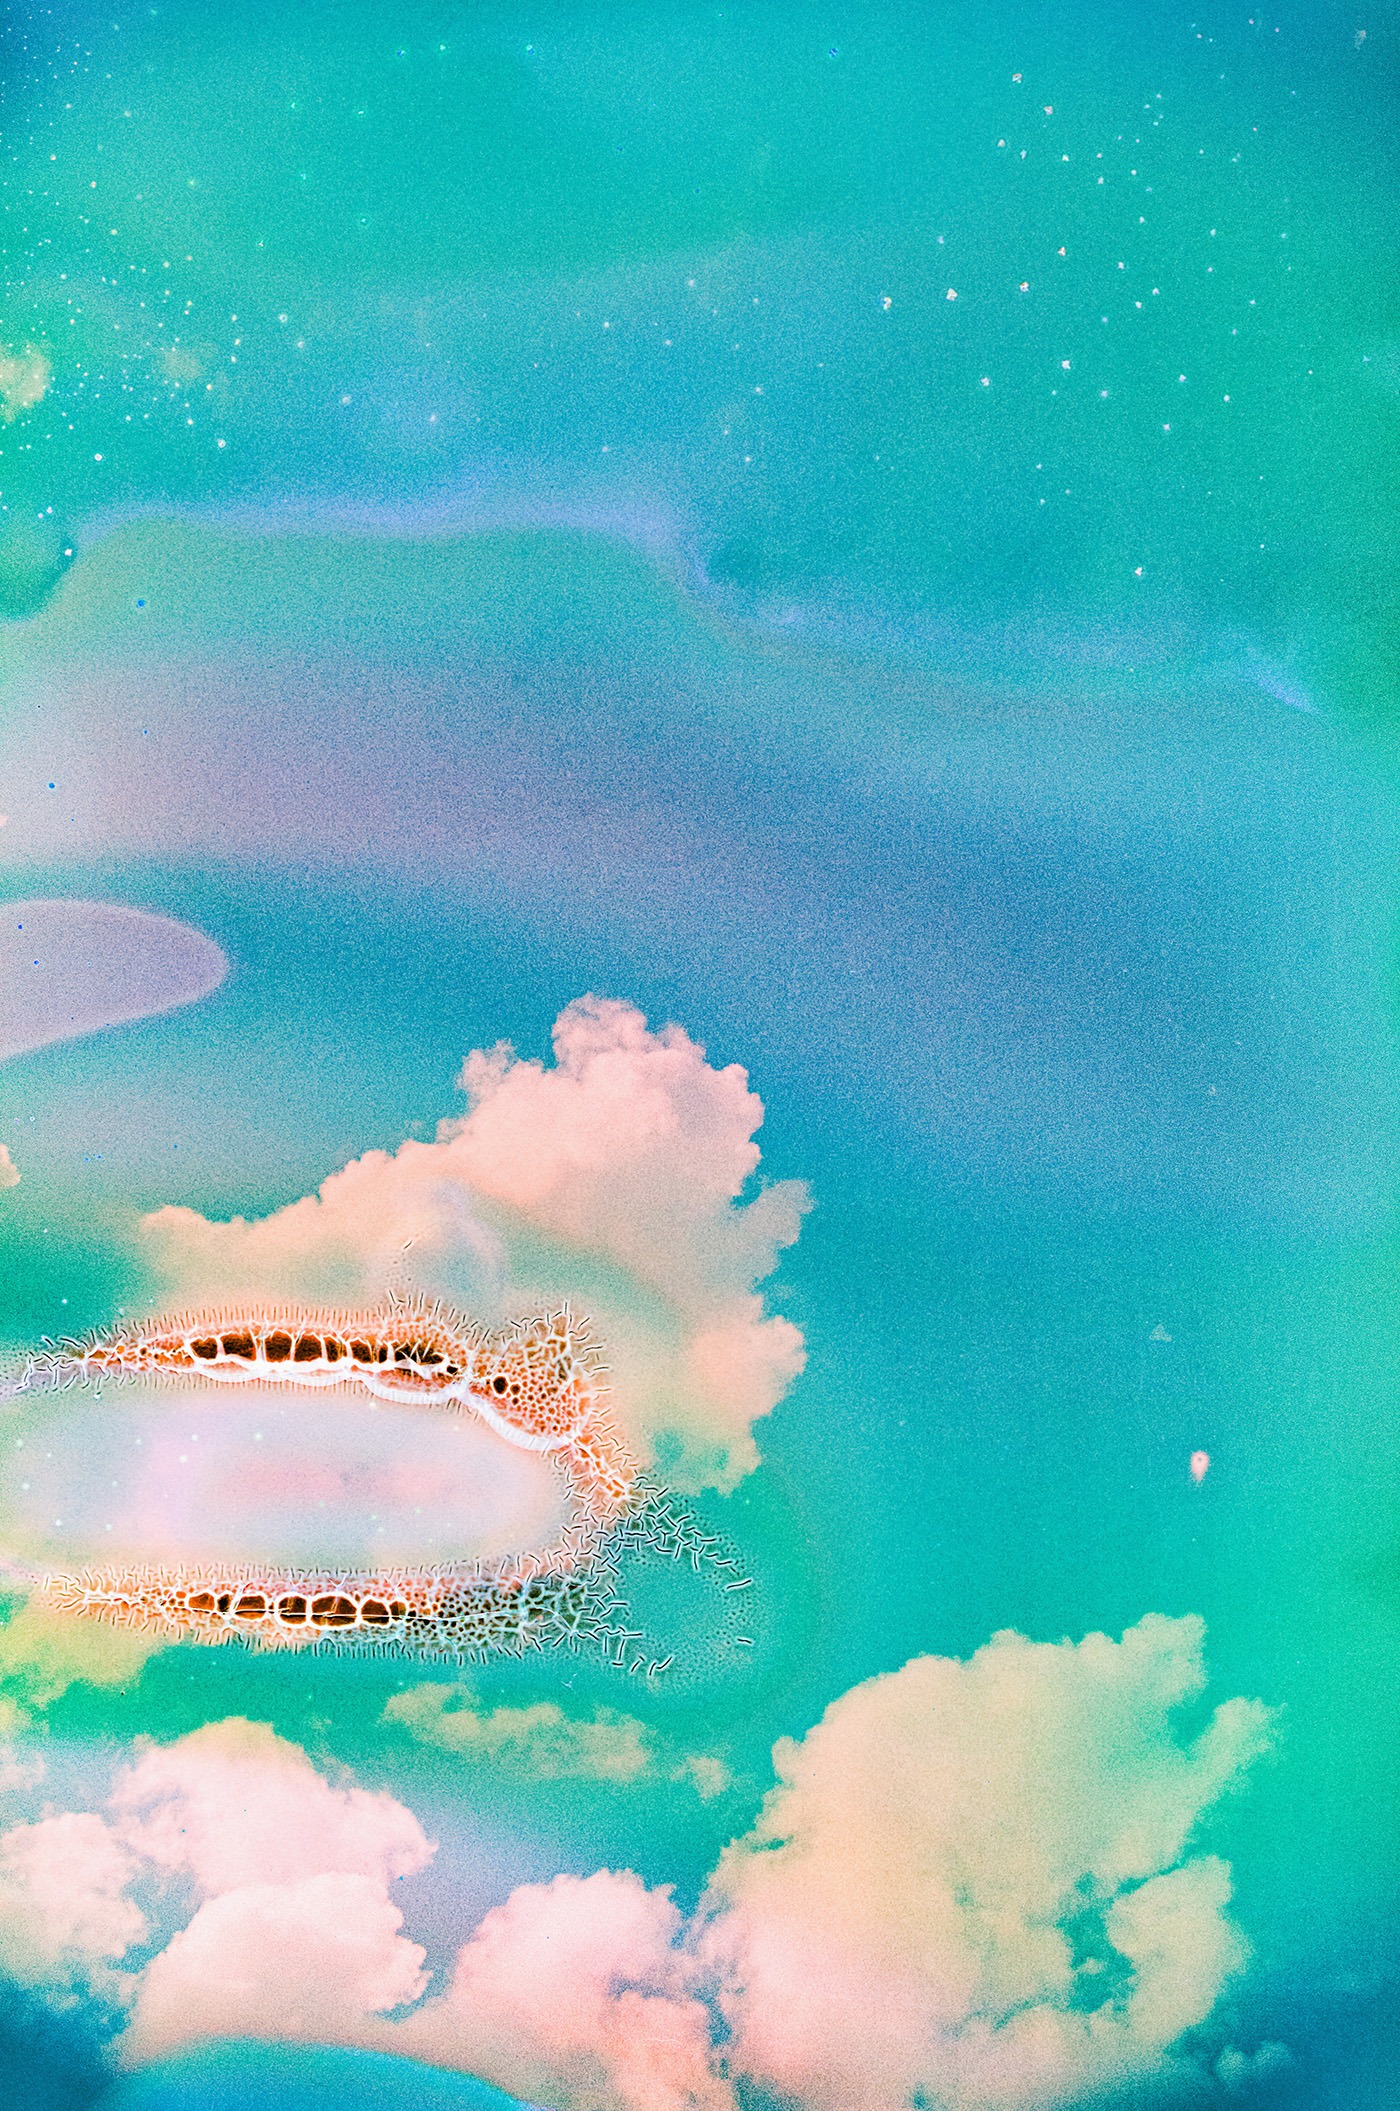 fluffy clouds in a psychedelic sky, "film soup" technique on 35mm film